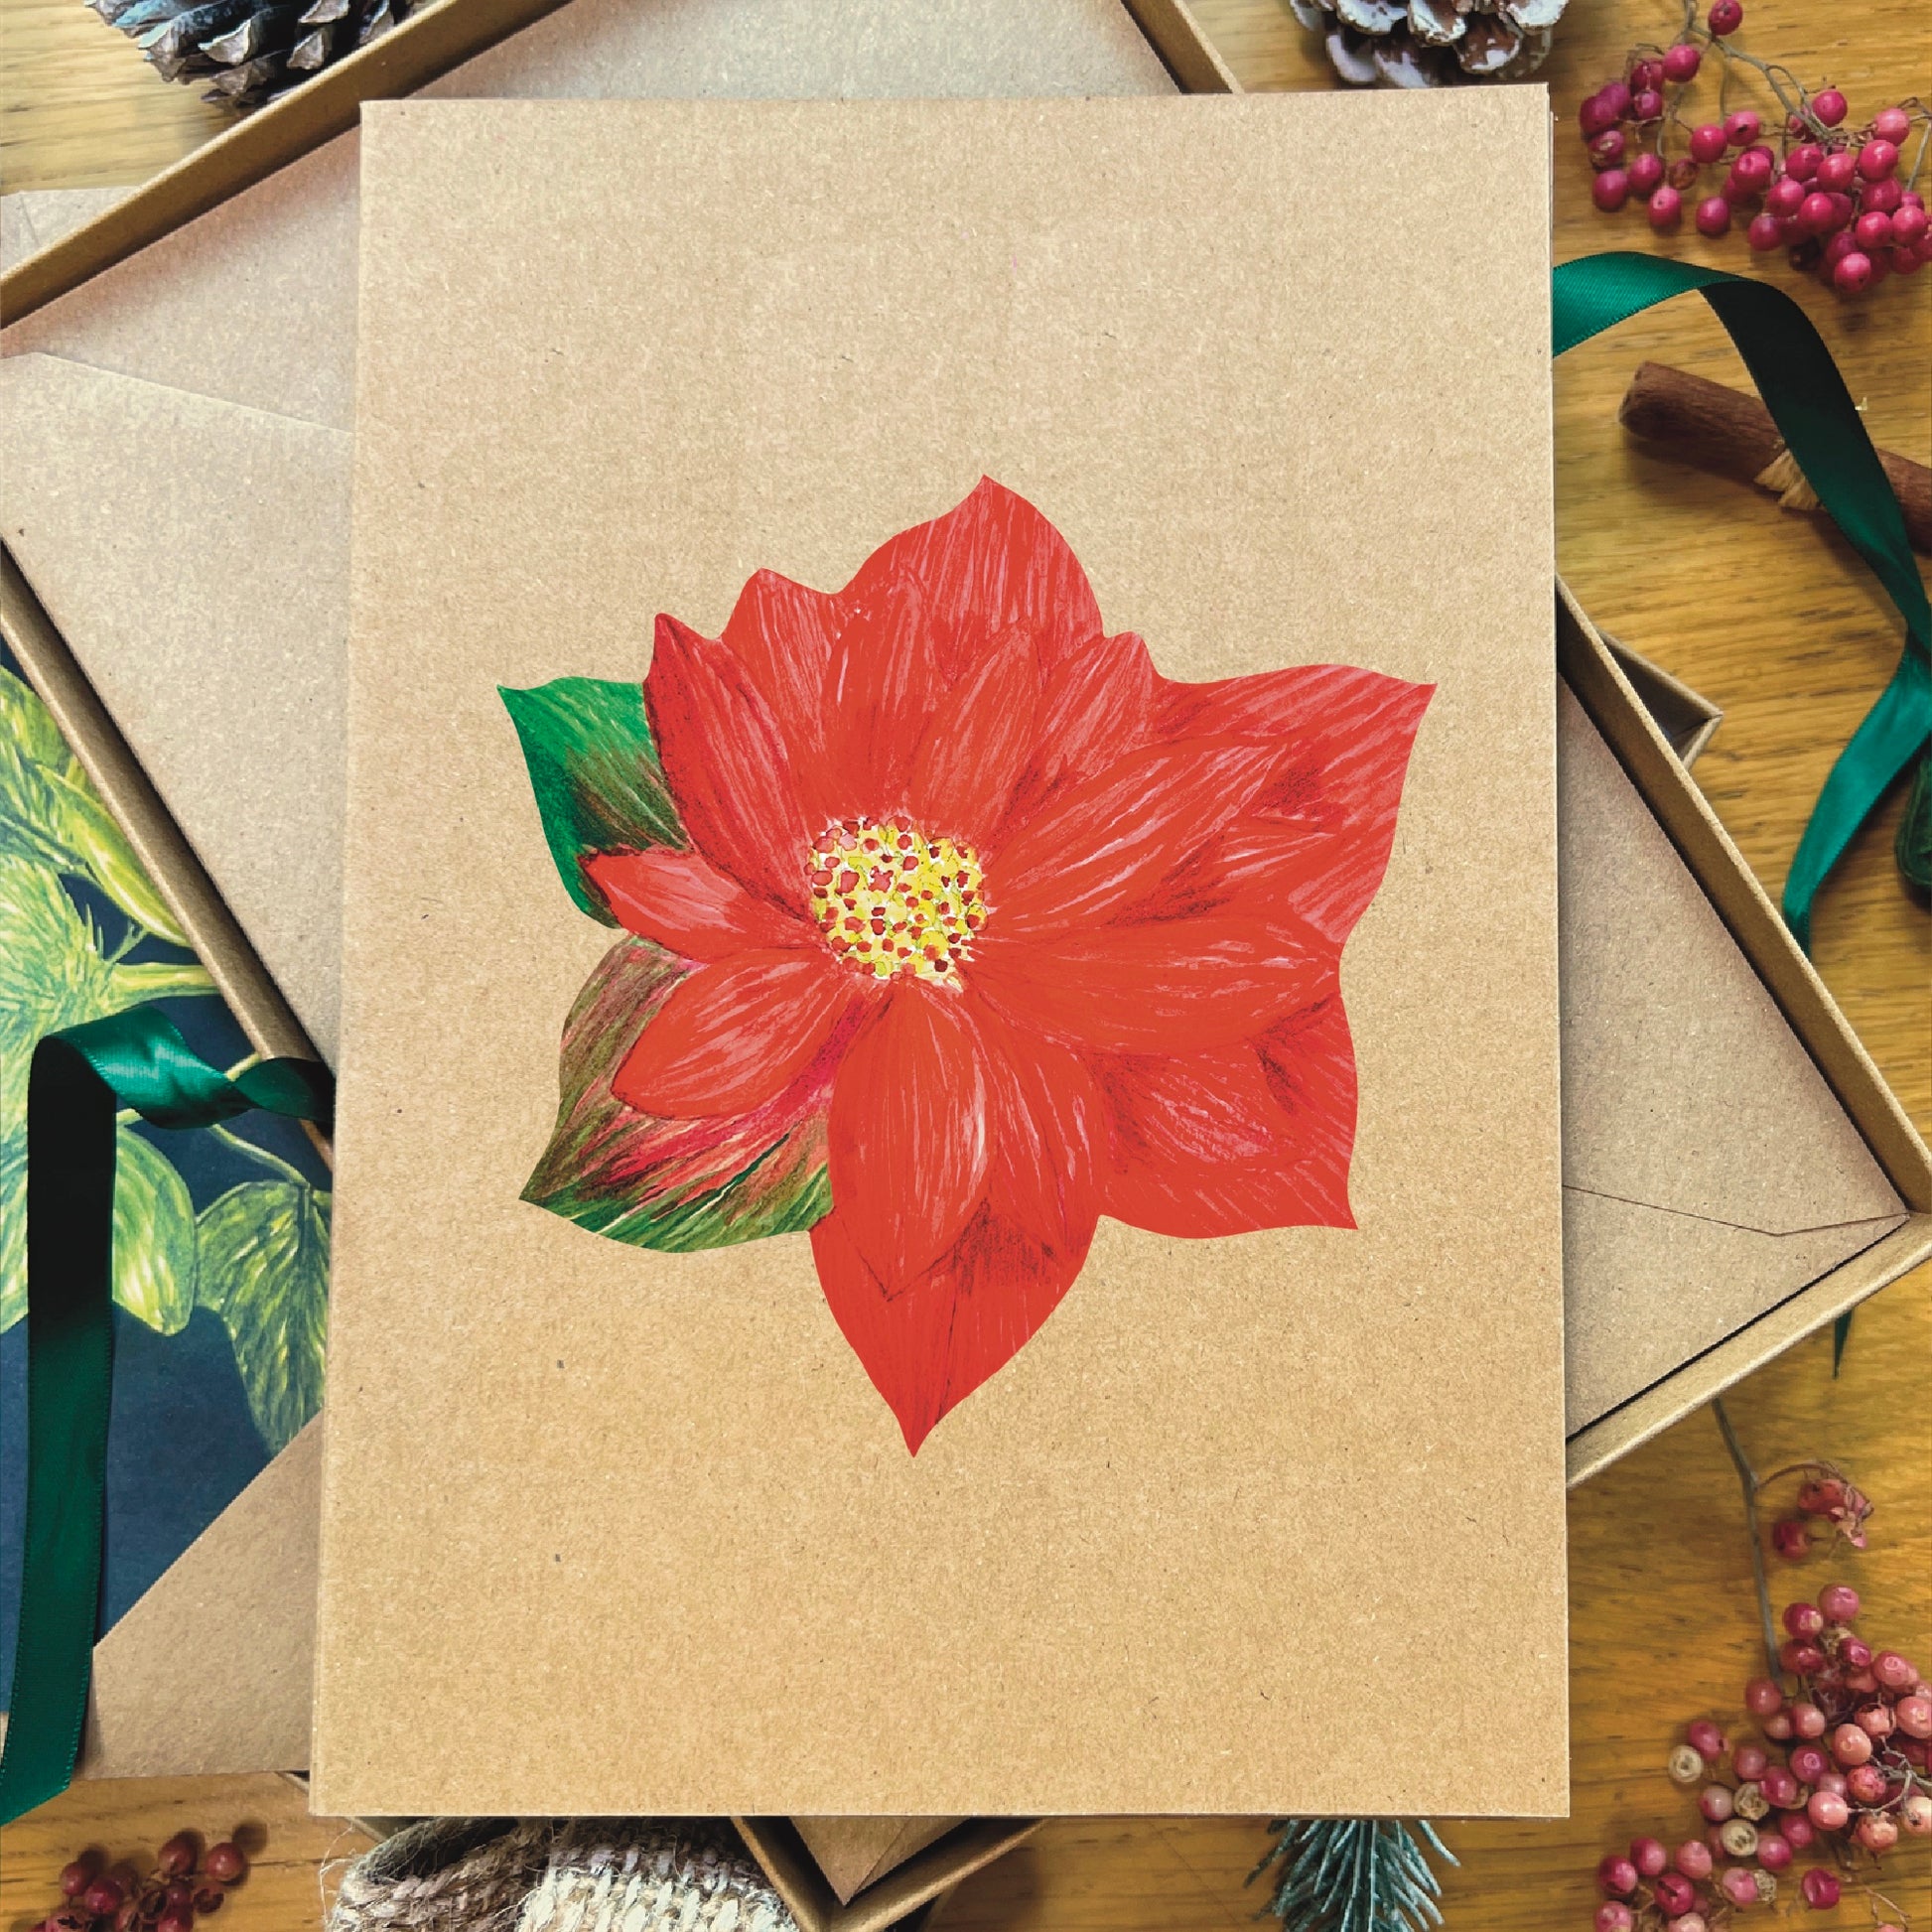 Red poinsettia illustrated in watercolour attached to brown Manila recycled greetings card on a wooden desk